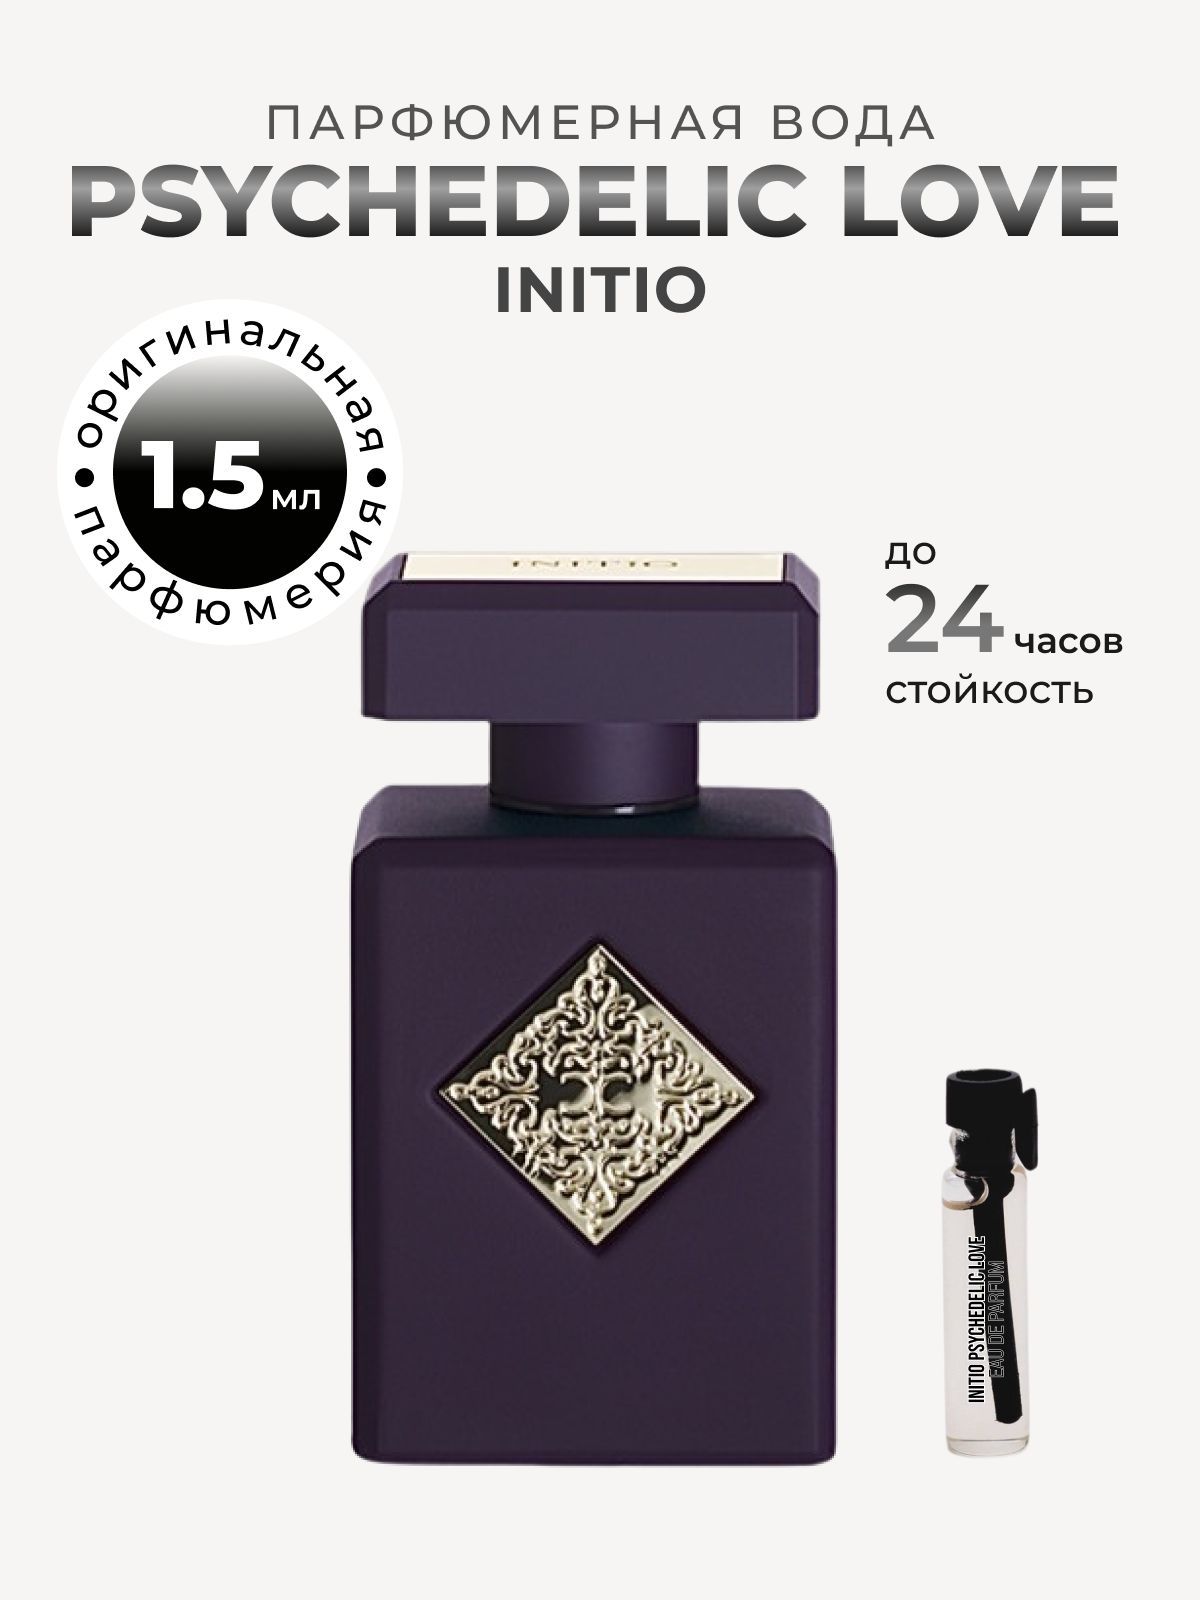 Initio prives psychedelic love. Psychedelic Love Initio Parfums prives. Инитио психоделик. Initio High Frequency. Инитио психоделическая любовь.